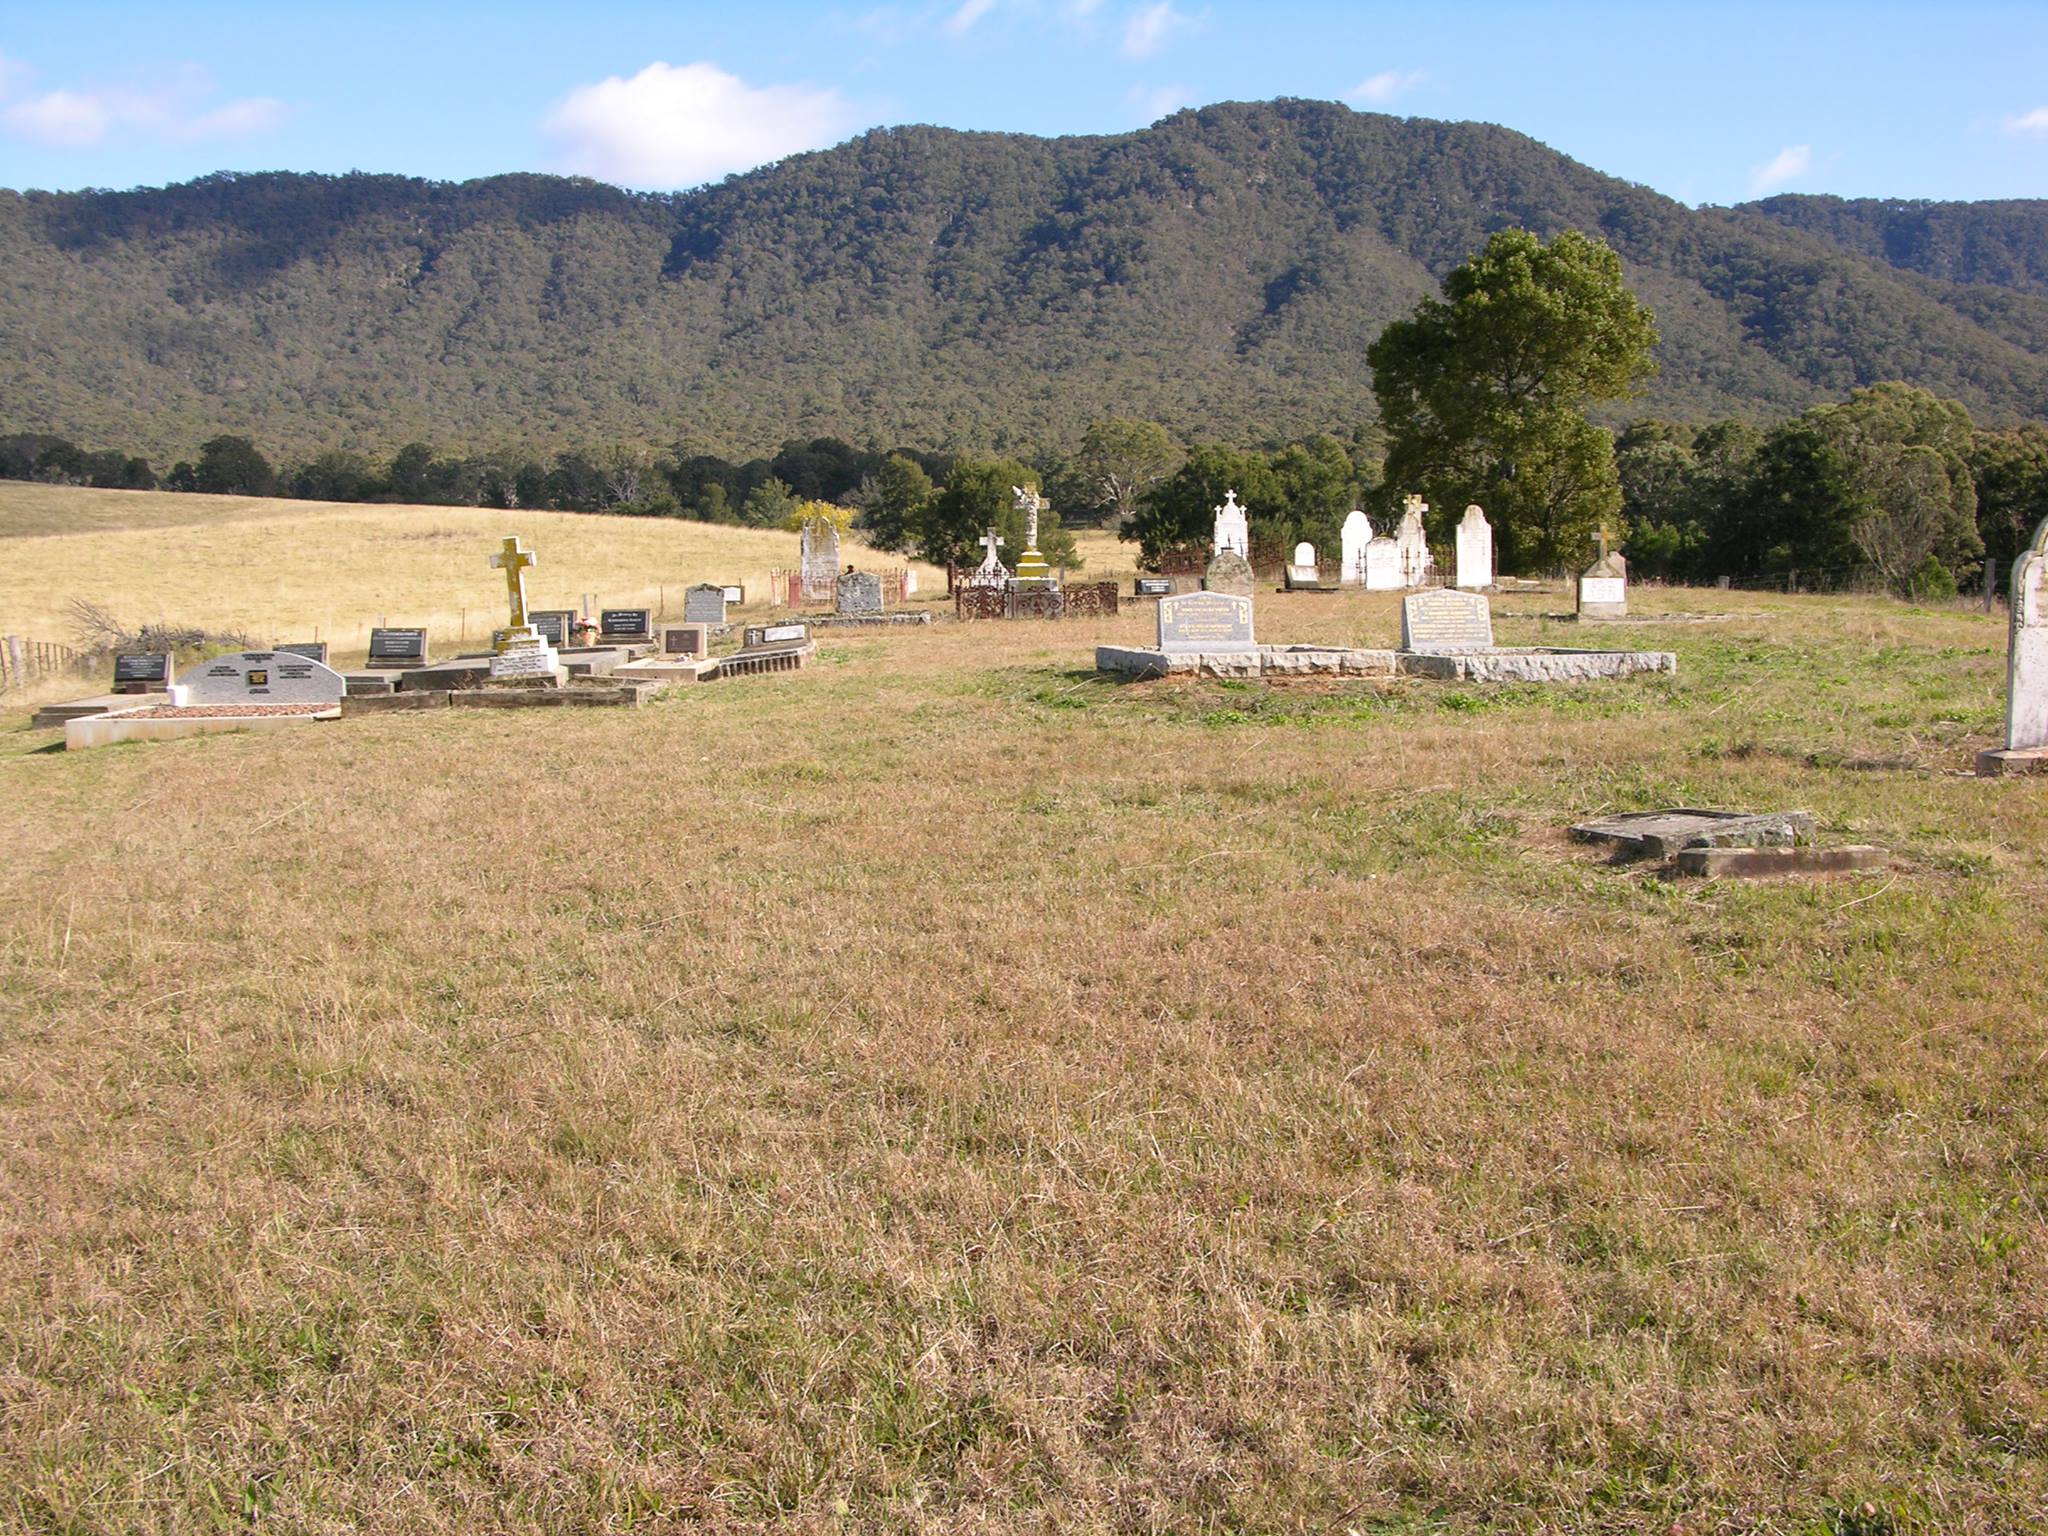 Trooper SMITH lies in an unmarked grave at Araluen Catholic Cemetery.